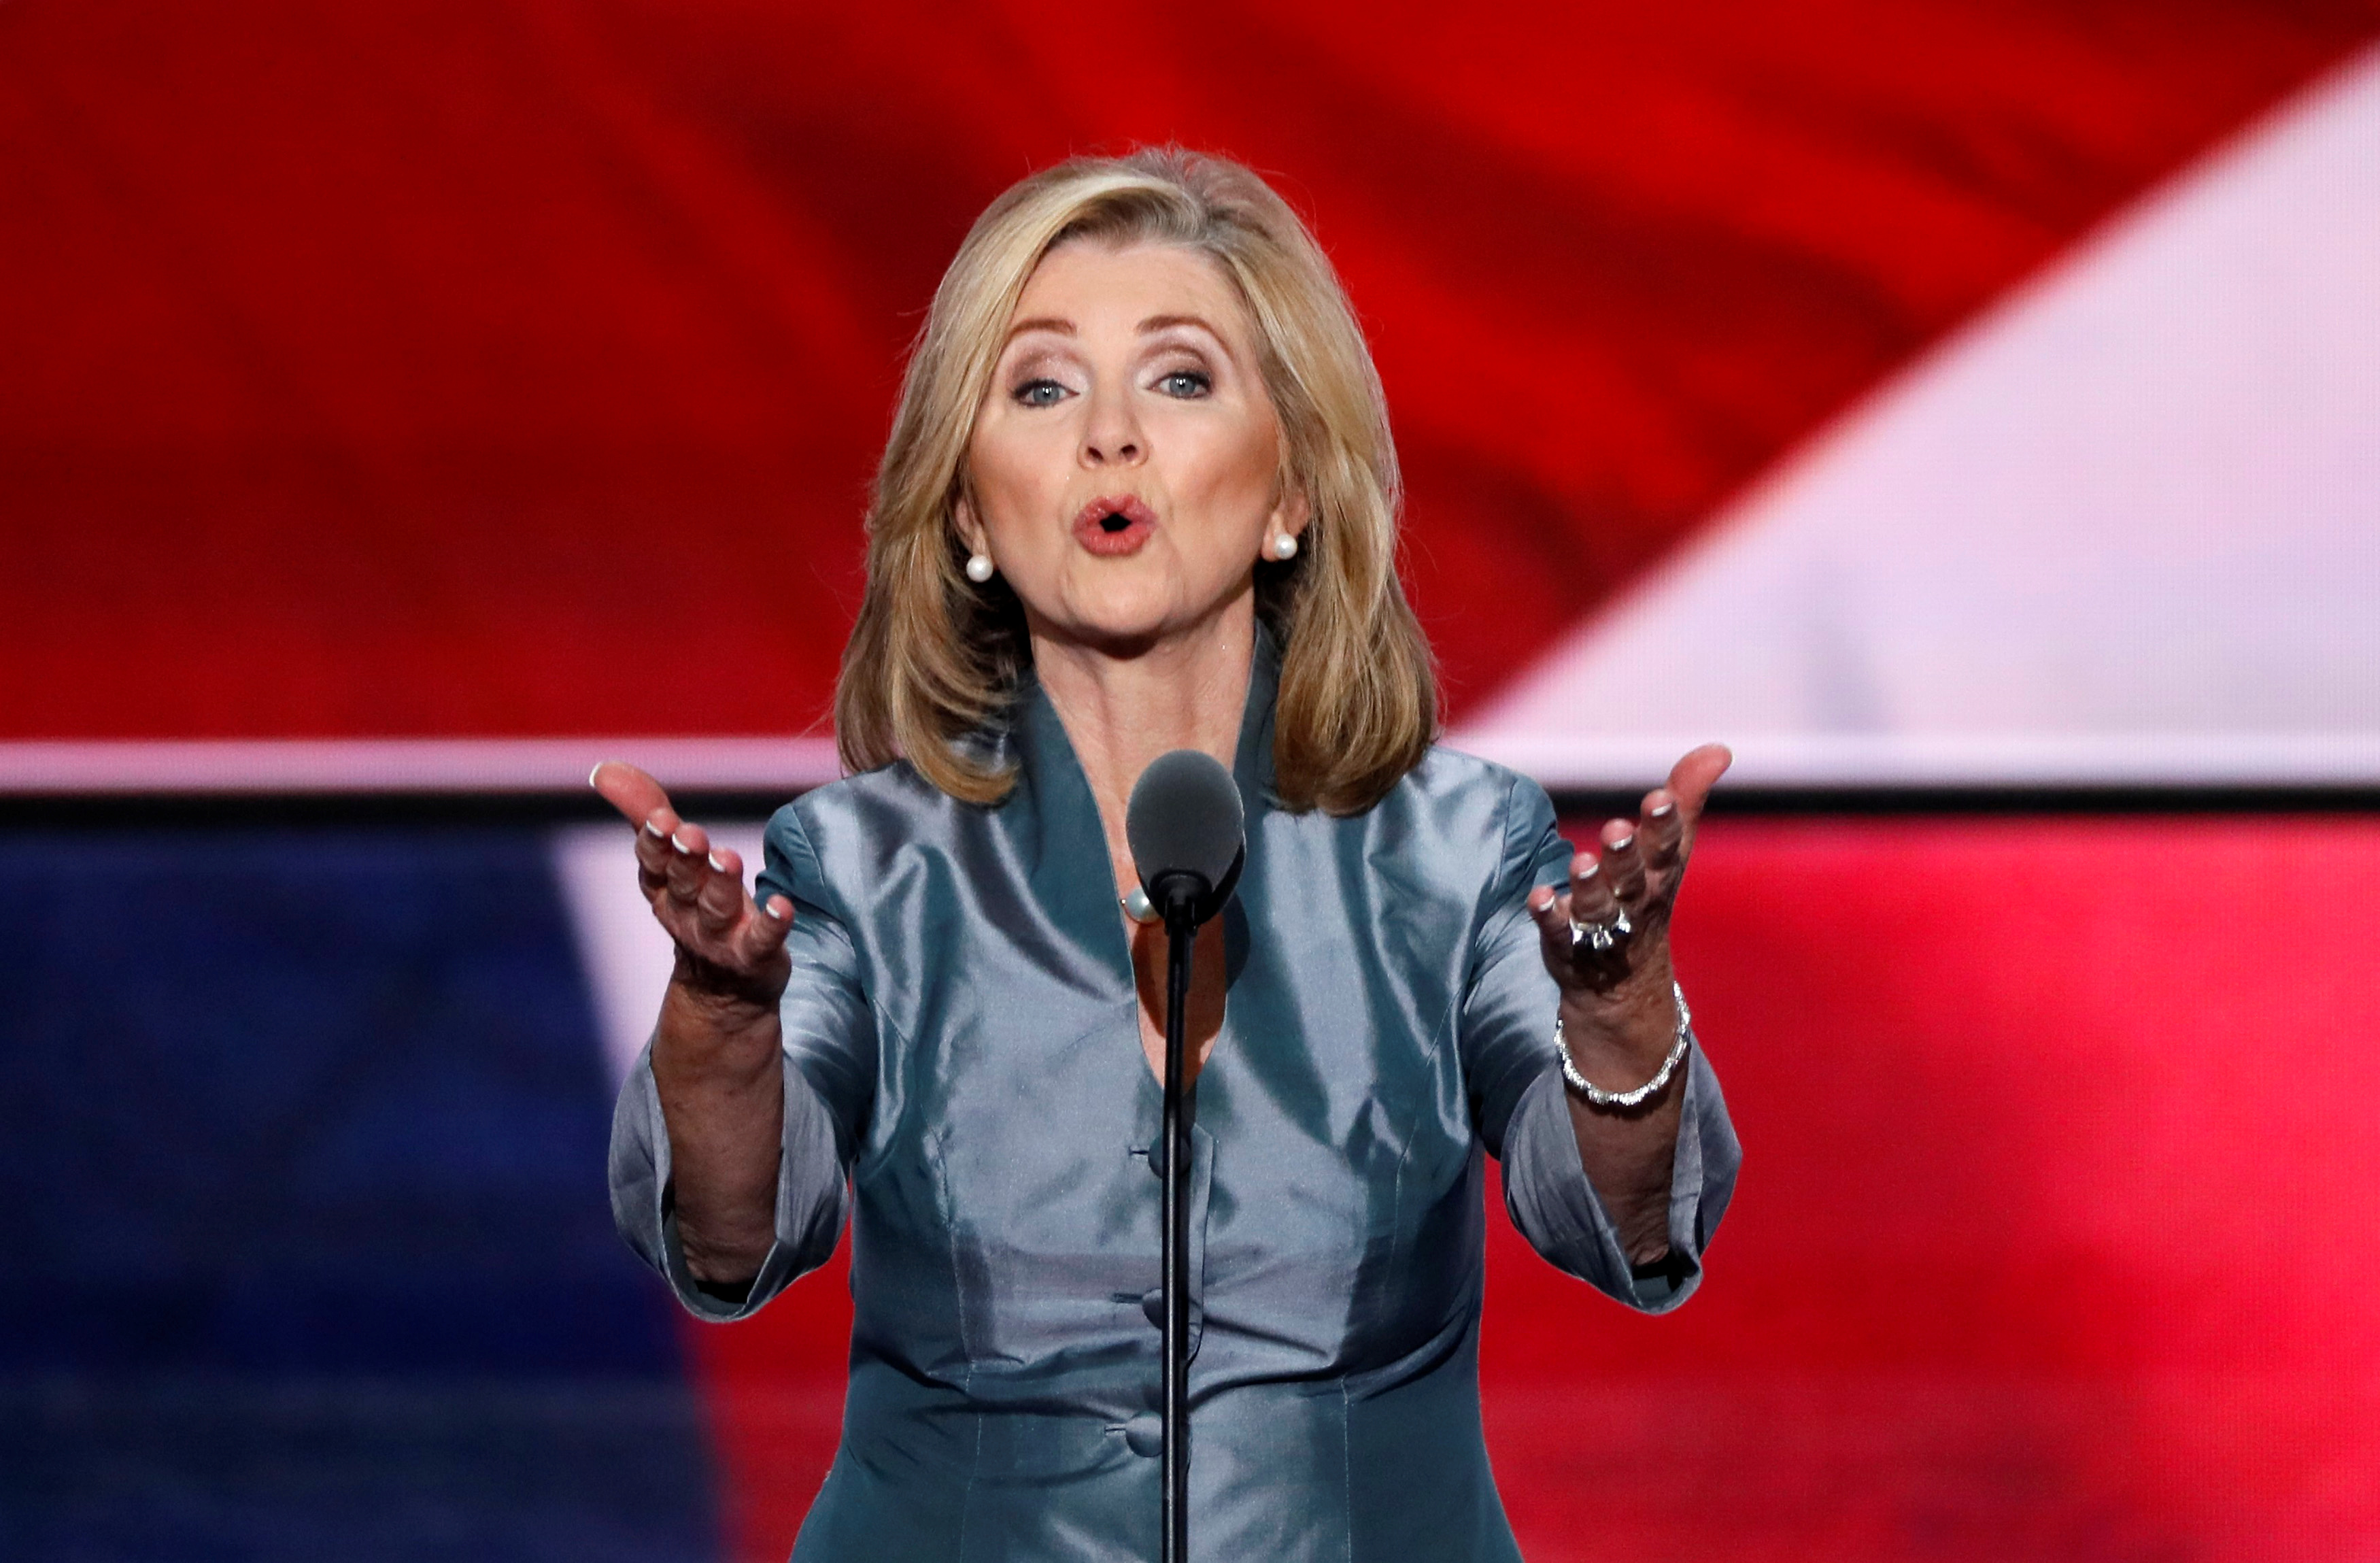 Representative Marsha Blackburn (R-TN) speaks during the final day of the Republican National Convention in Cleveland, Ohio, U.S. July 21, 2016. REUTERS/Mike Segar